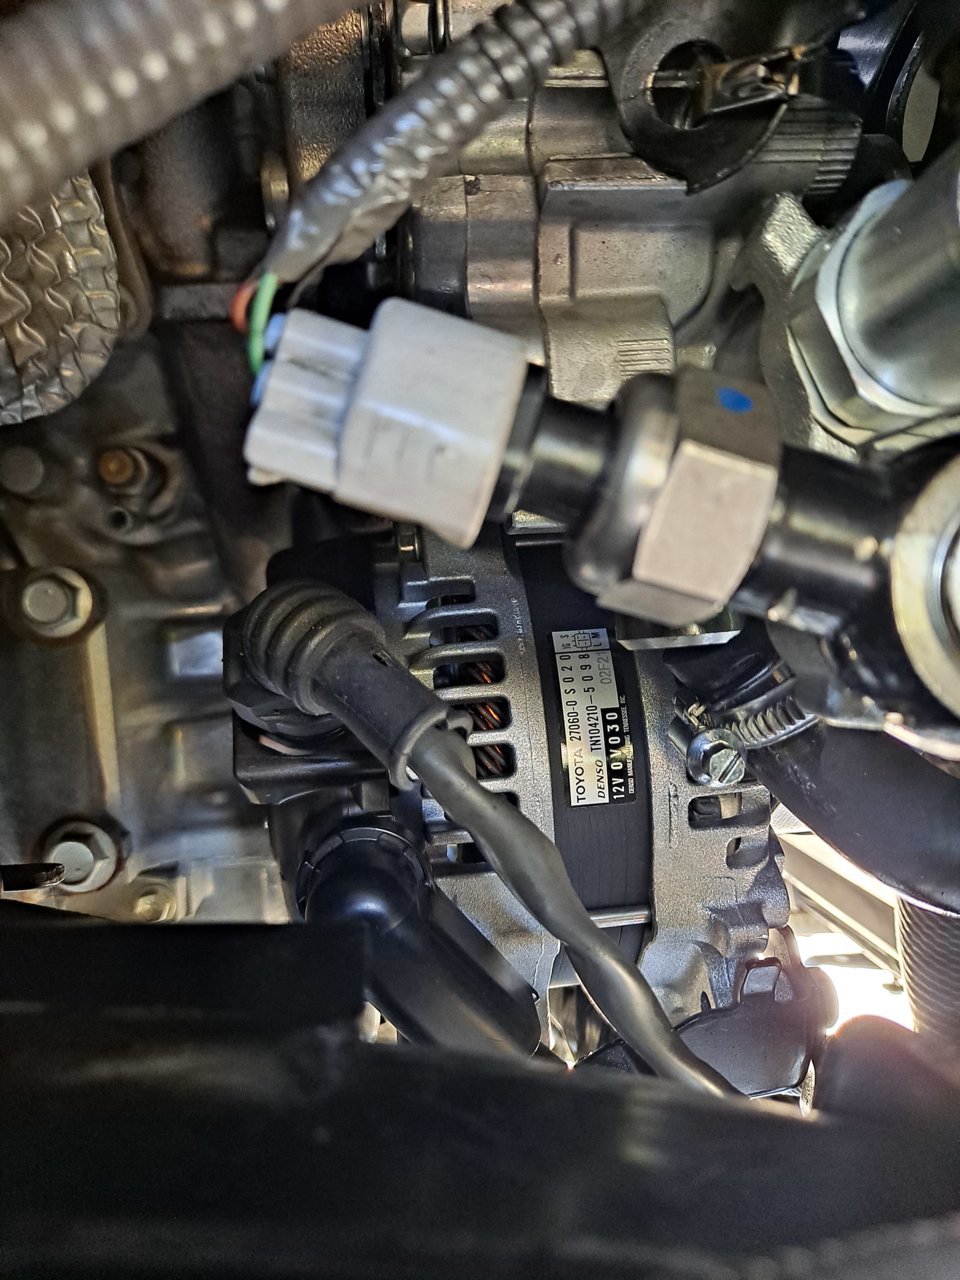 Low voltage, I've replaced everything | Toyota Tundra Forum